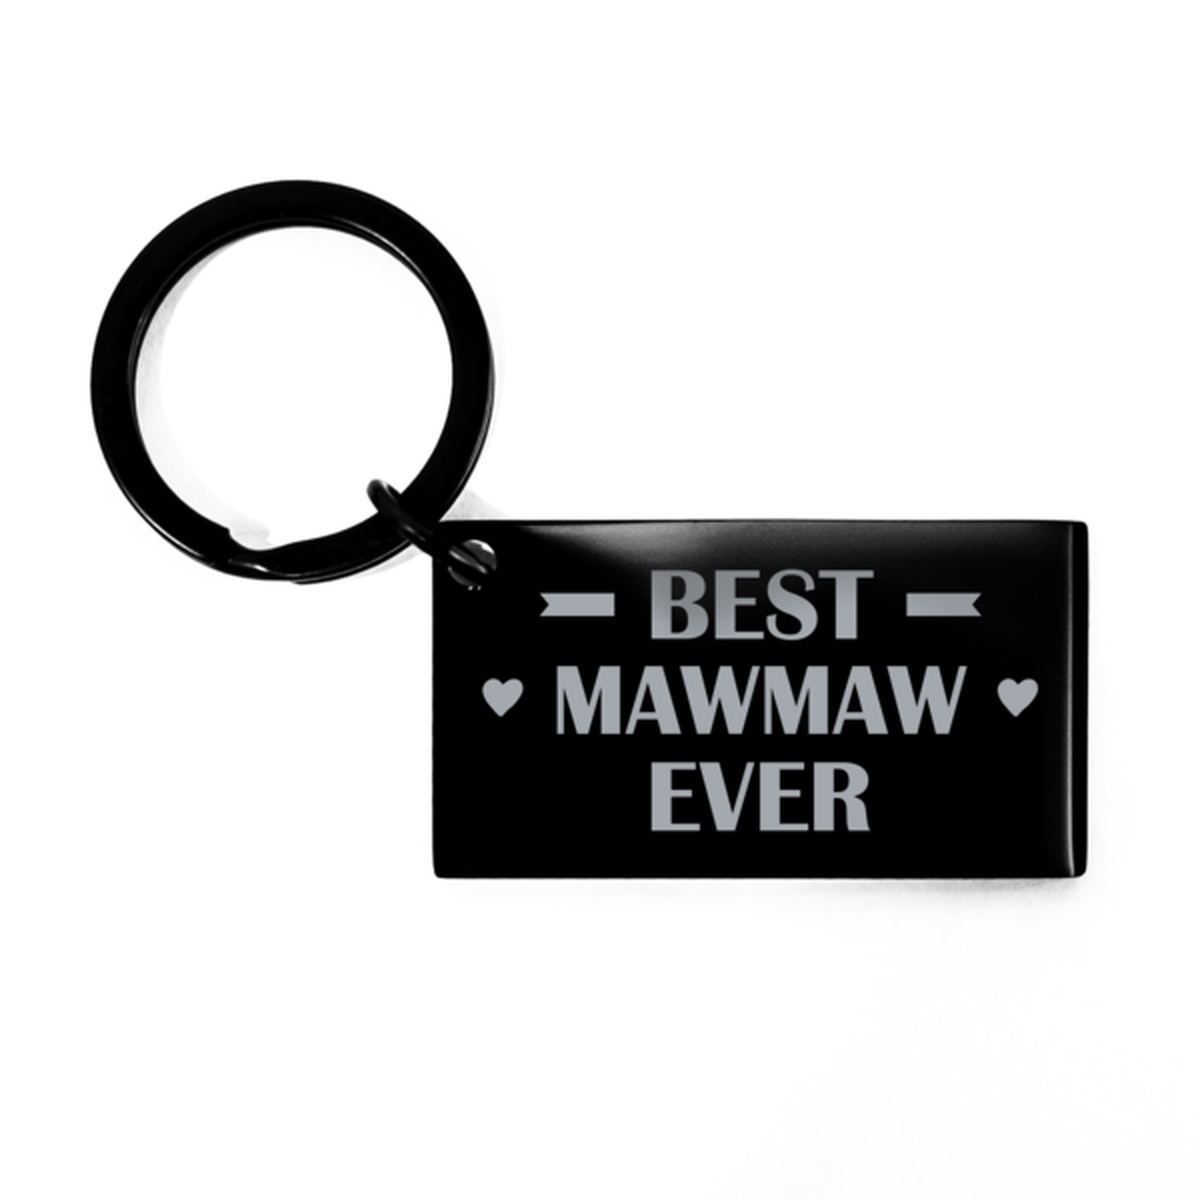 Best Mawmaw Ever Mawmaw Gifts, Funny Black Keychain For Mawmaw, Birthday Engraved Keyring Presents For Women